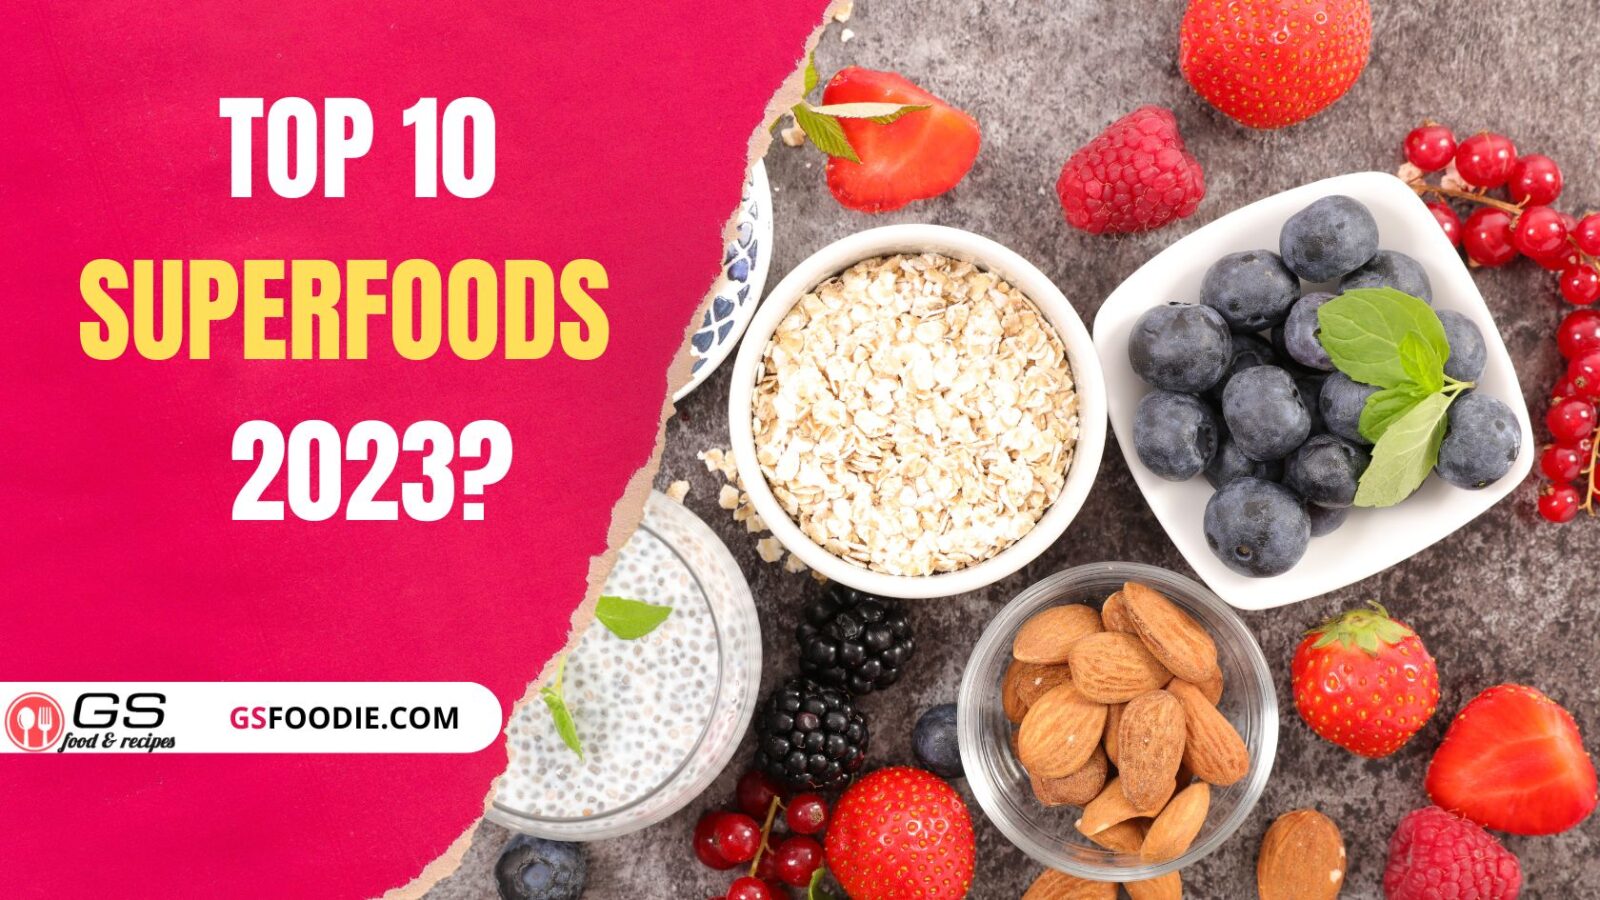 Top 10 Superfoods for 2023